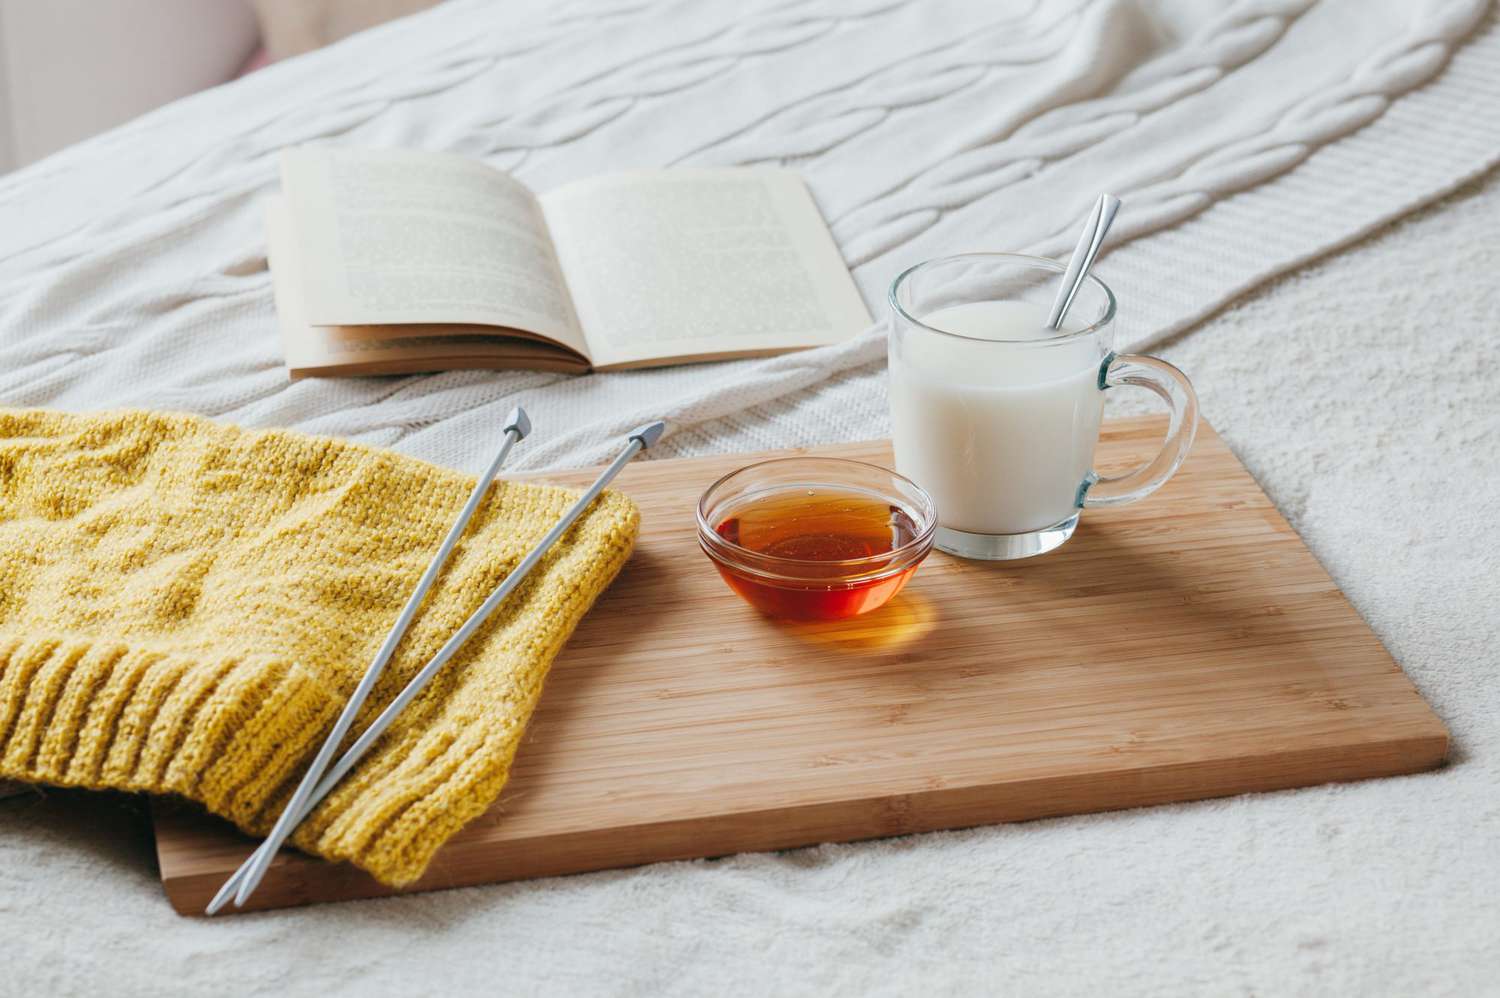 Knitting needles and yarn alongside hot milk in a glass cup and honey on a wooden board.